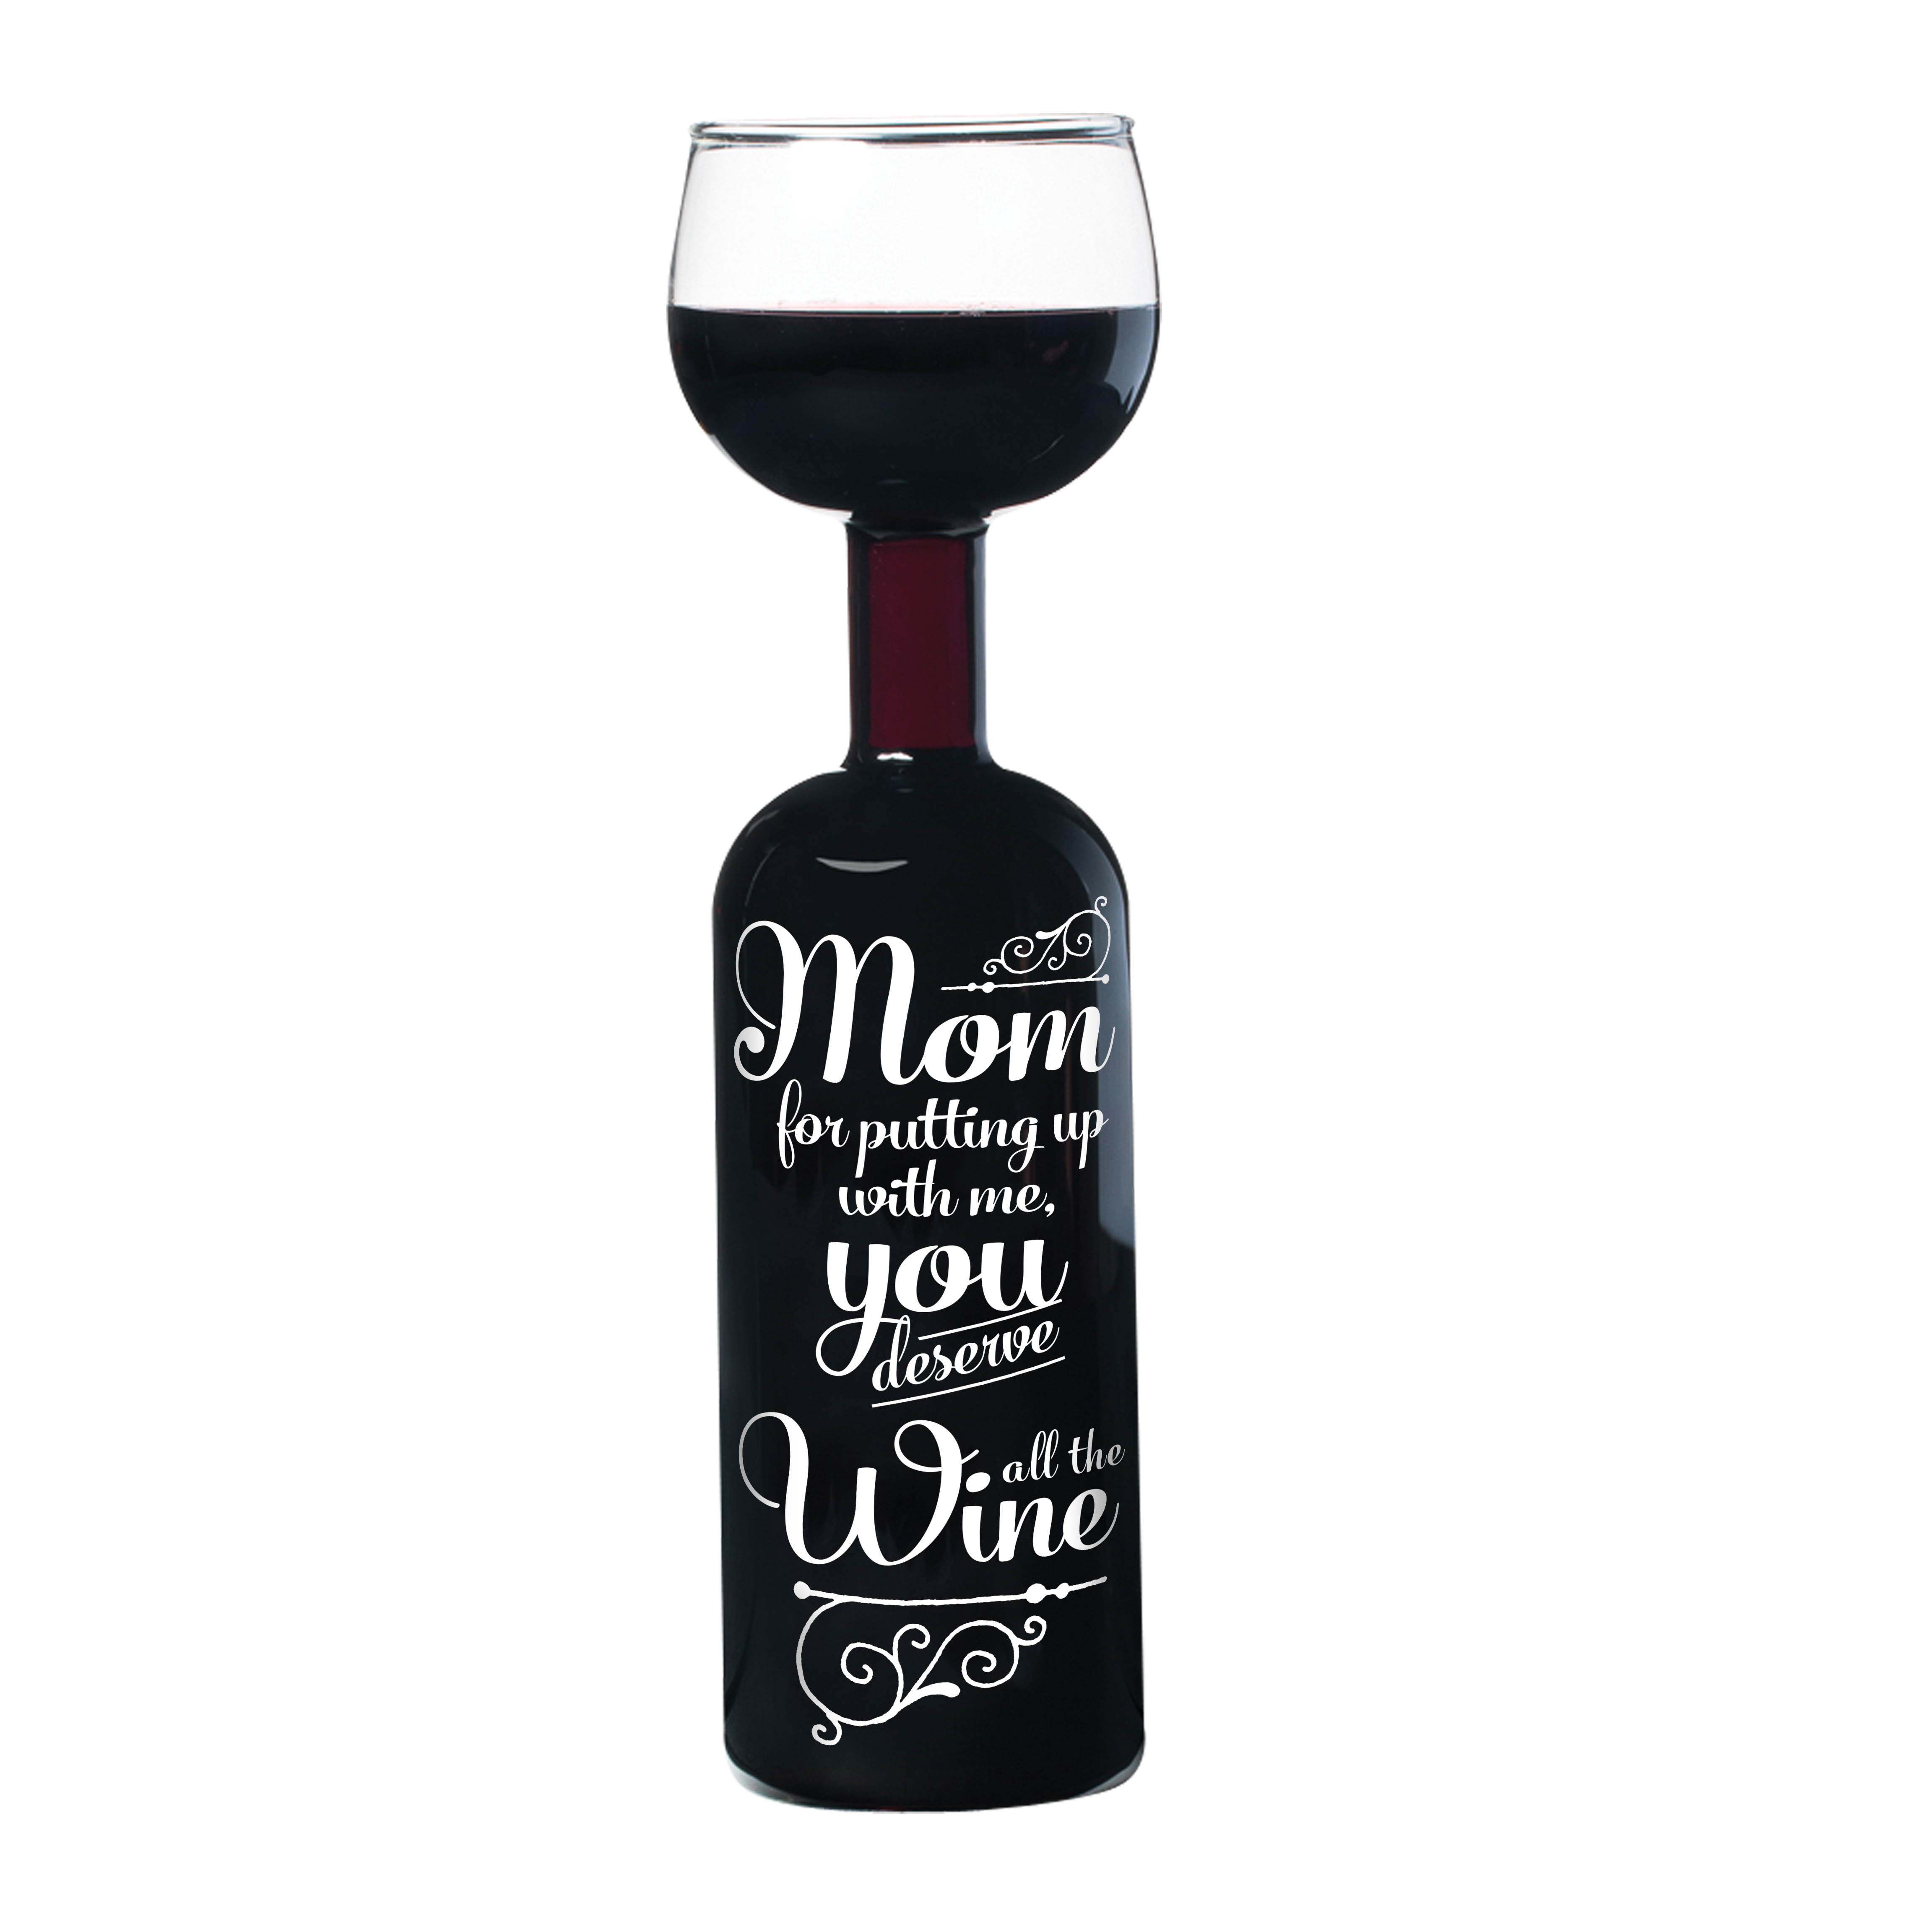 BigMouth Inc. Original Wine Bottle Glass – Holds an entire 750mL Bottle of Wine, Reads "Mom, for putting up with me, you deserve All the Wine", Great Gift for Wine Lovers - image 1 of 2